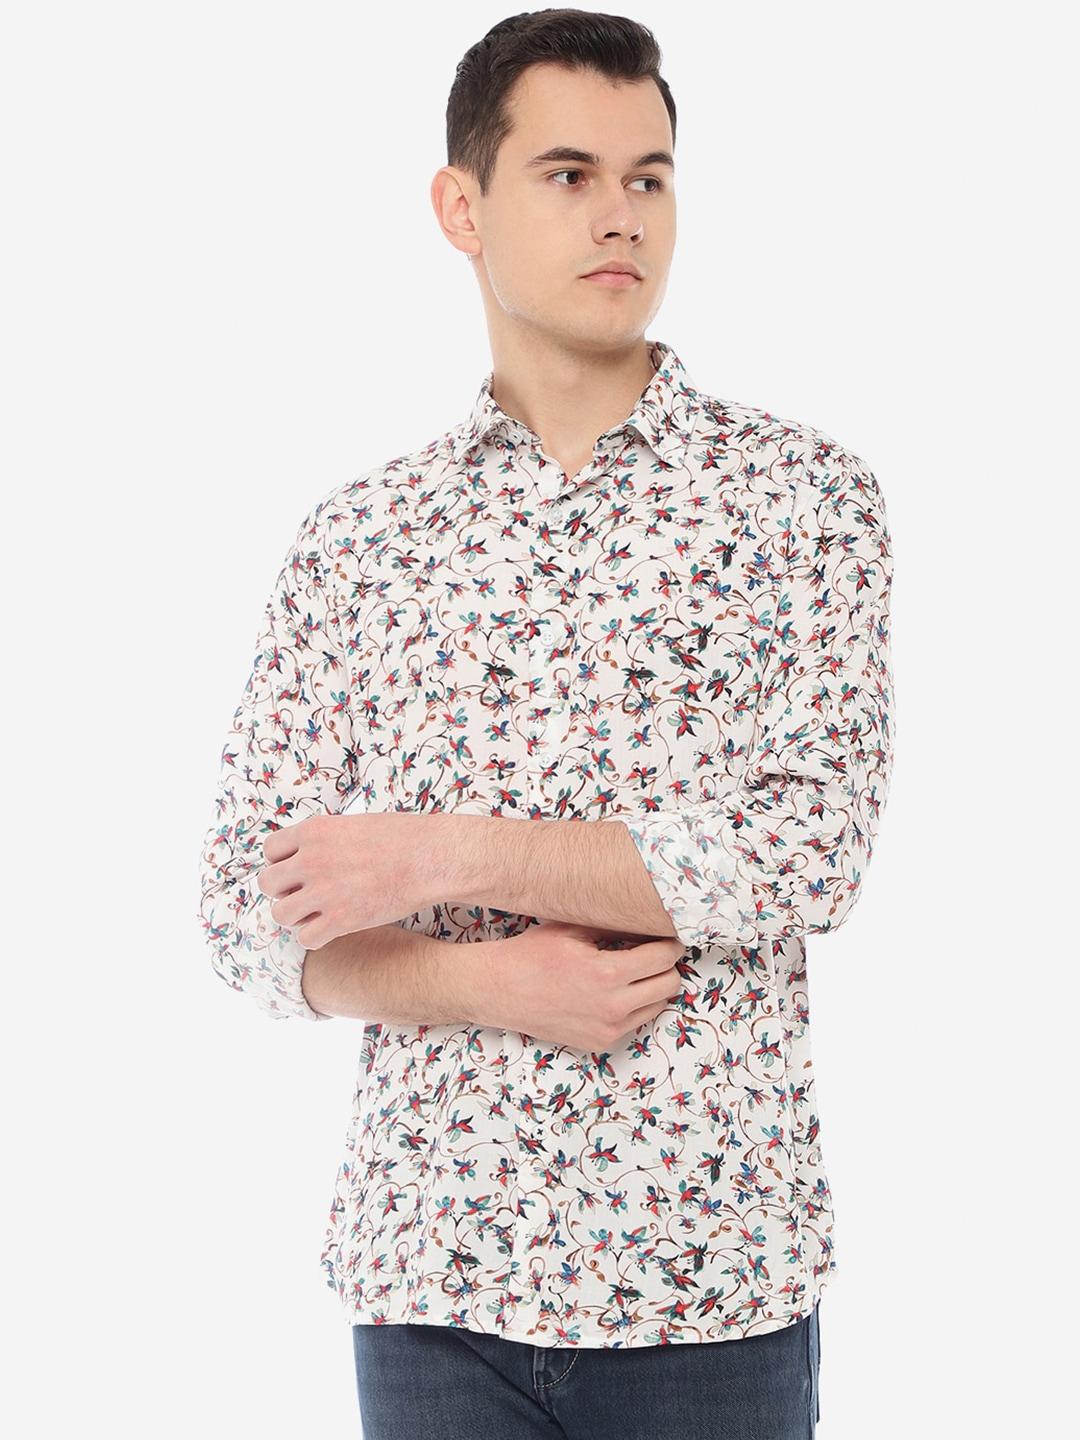 JADE BLUE Slim Fit Floral Printed Cotton Casual Shirt